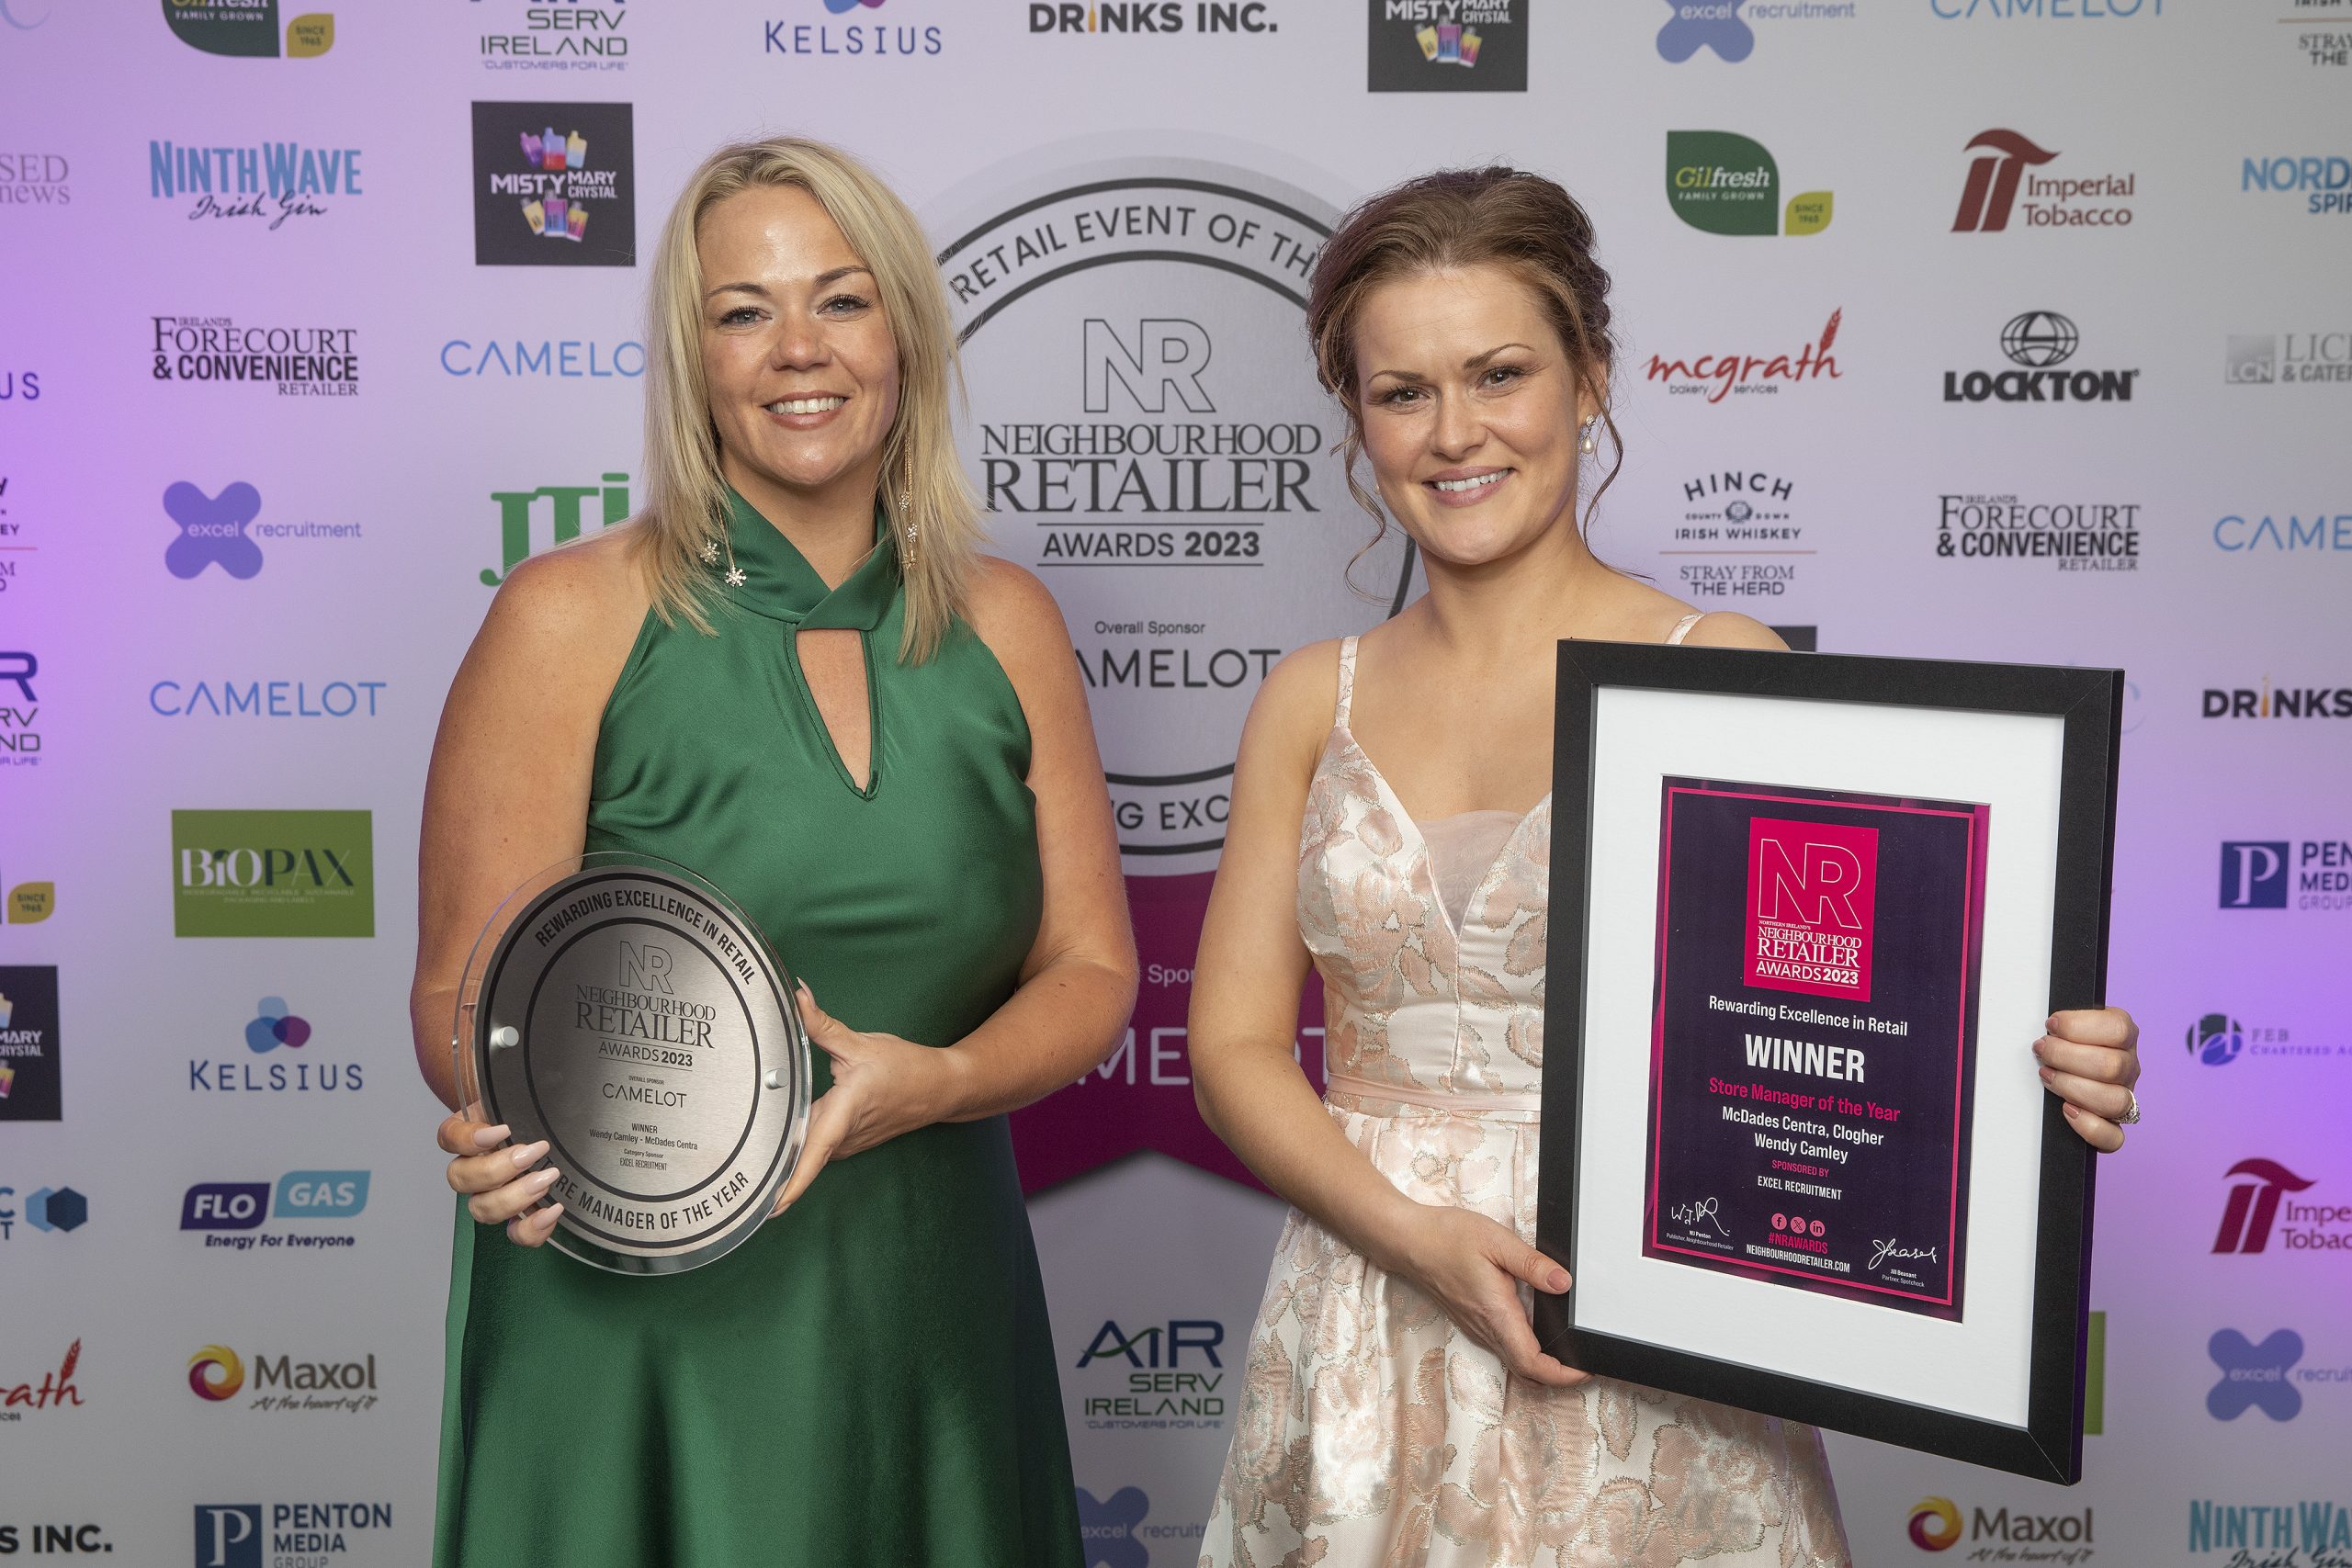 ‘Meeting the changing needs of customers’ helps Wendy secure Store Manager award